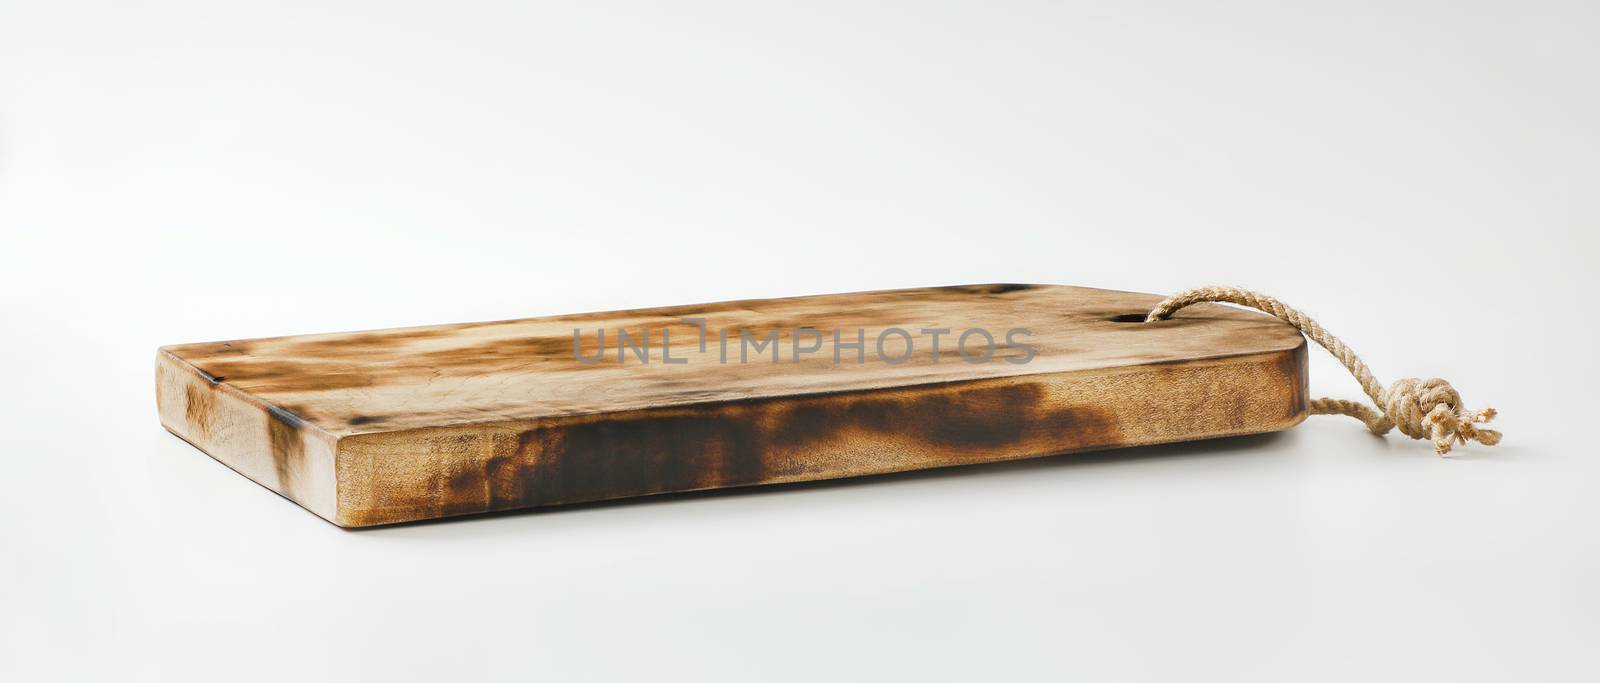 Rustic rectangle wooden cutting board or serving tray